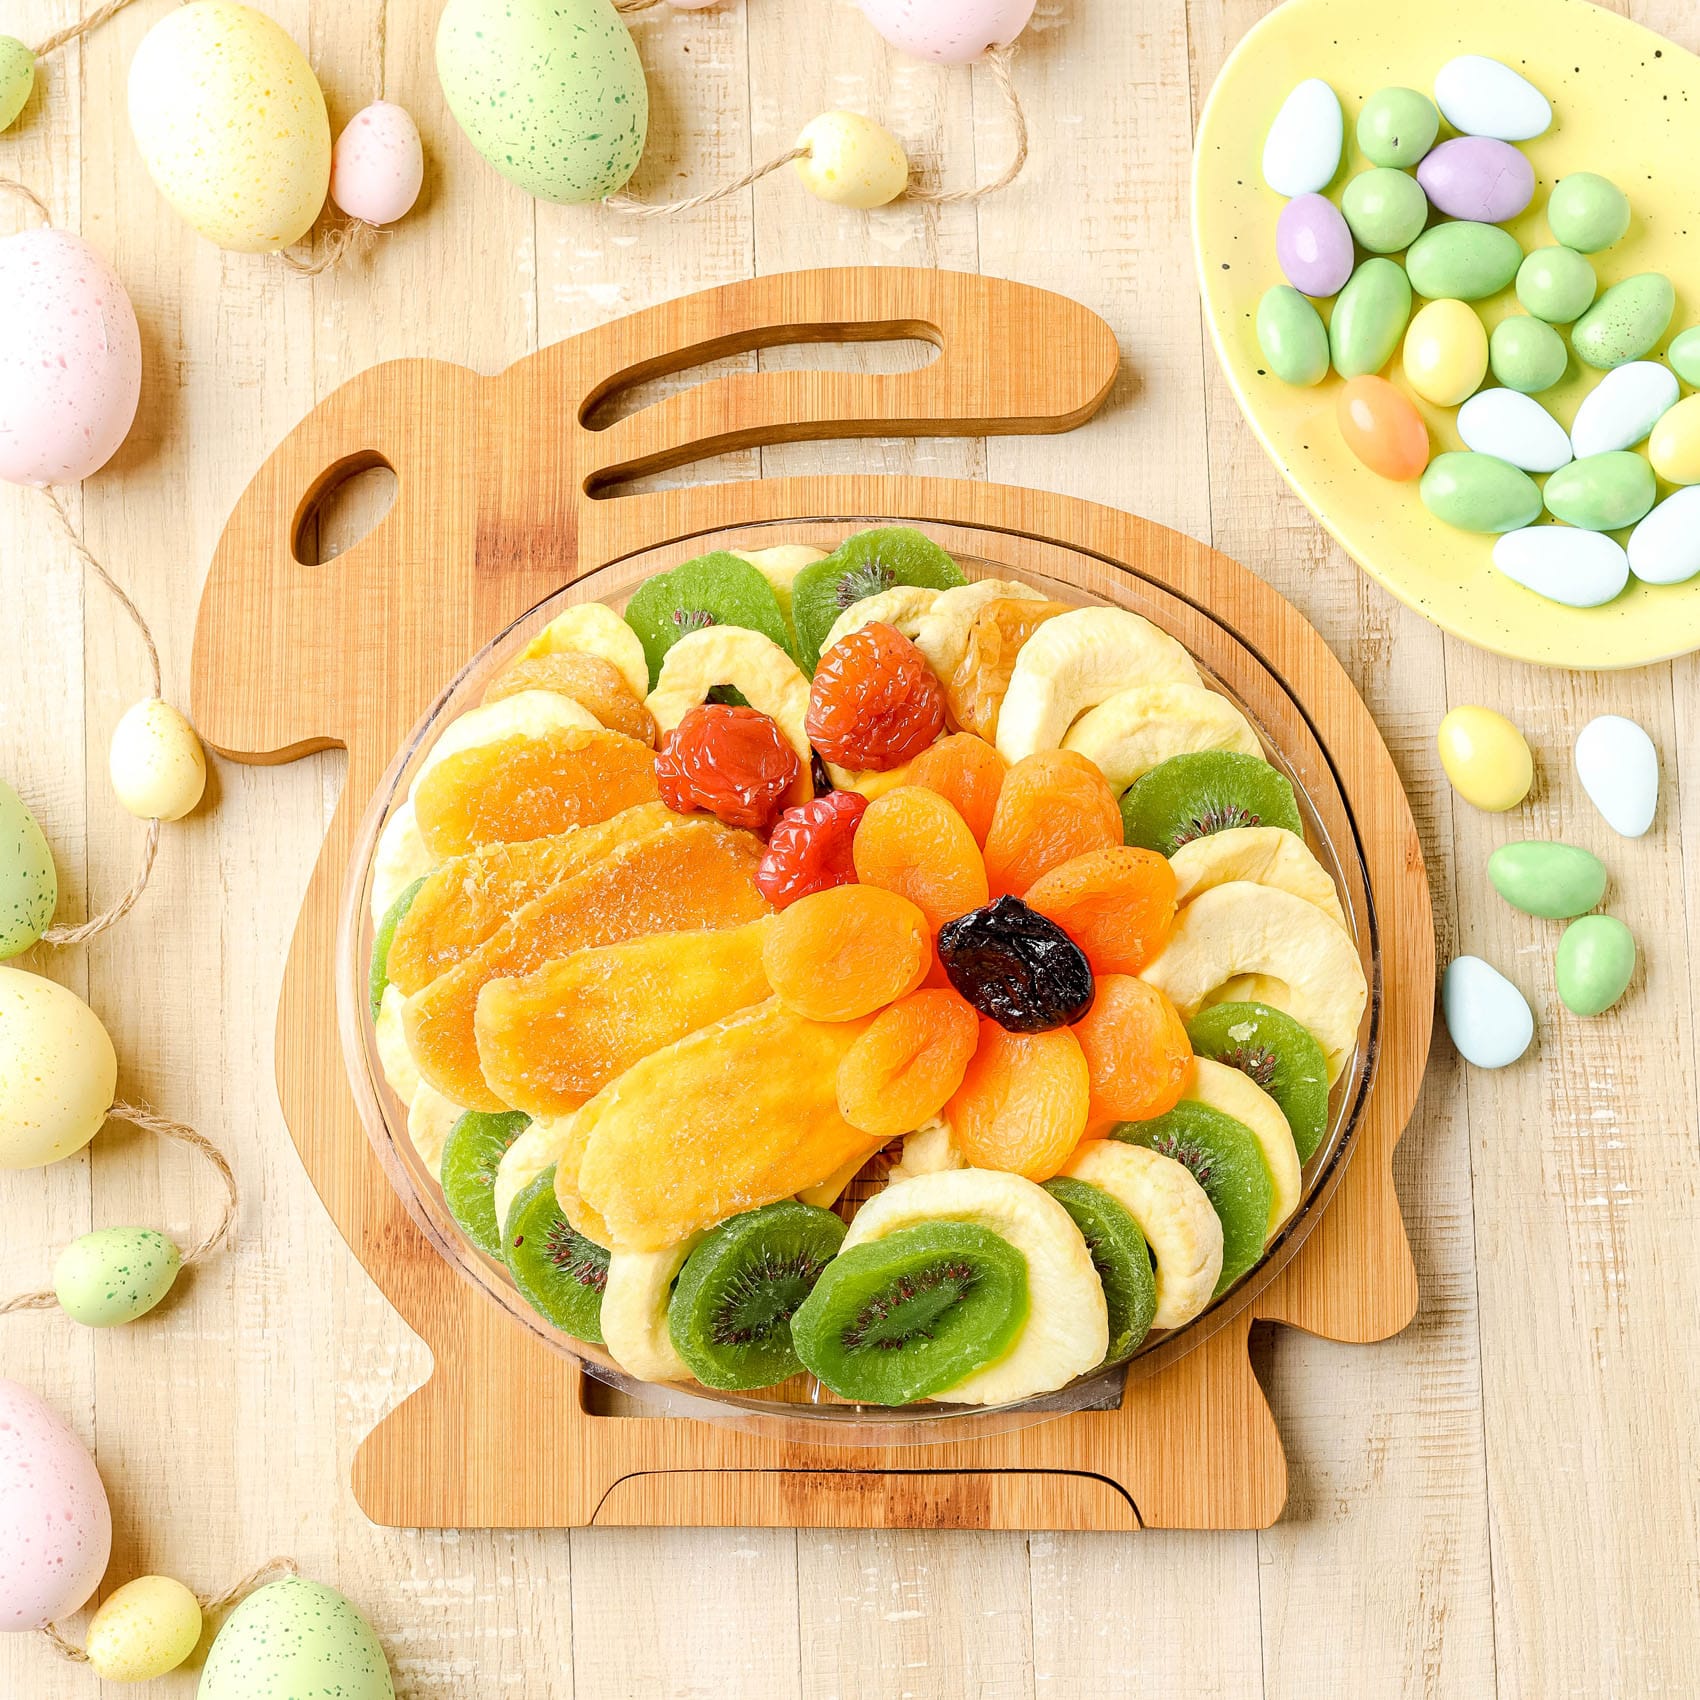 Easter Bunny Fruit Tray - The Tasty Travelers